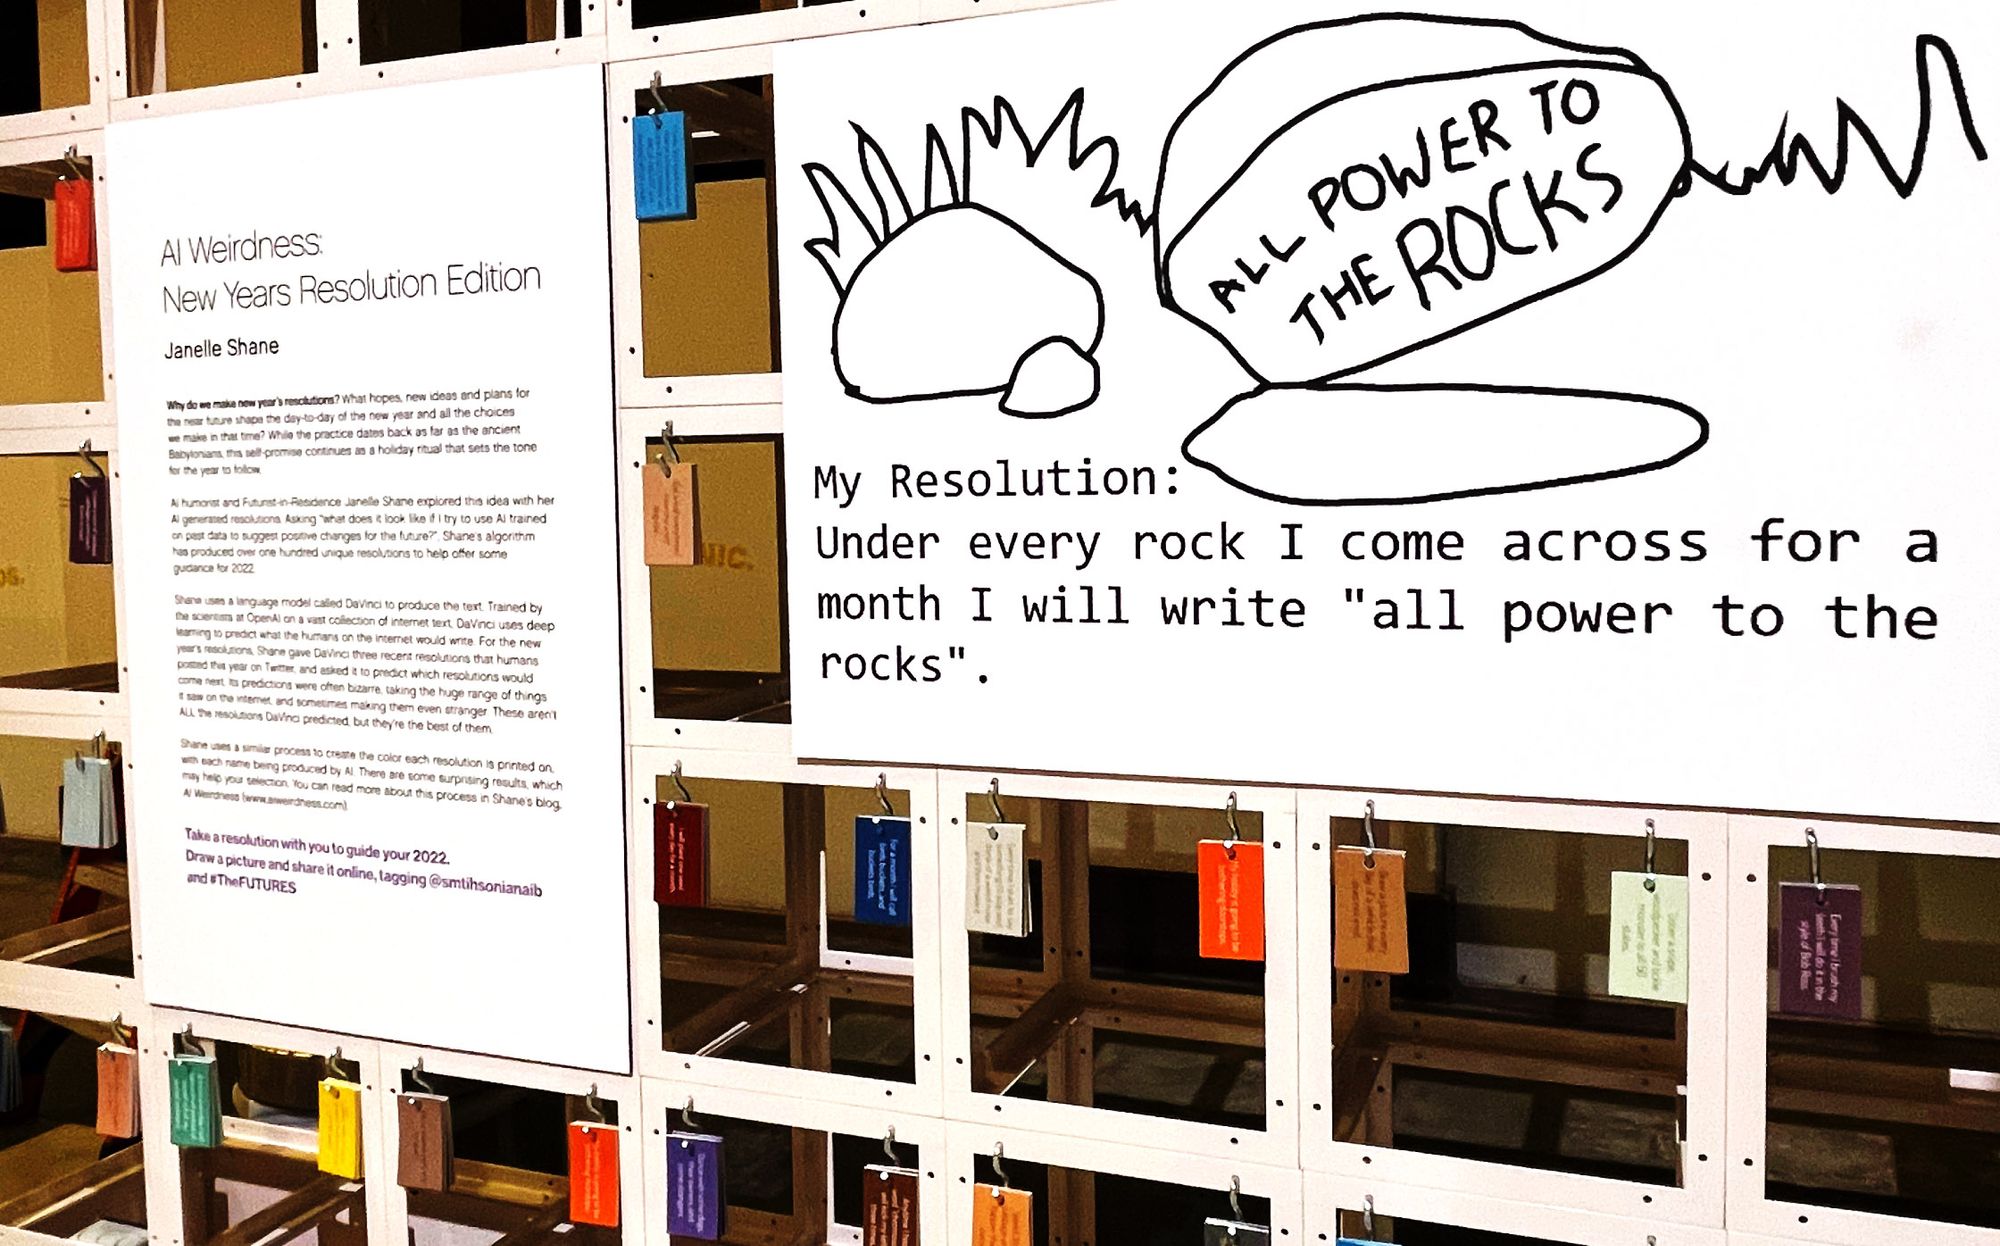 Colorful tags hang from a white grid frame. Two posters are visible on the exhibit; one says "AI Weirdness New Years Resolution Edition" and the other says "My resolution: Under every rock I come across for a month I will write 'all power to the rocks'."